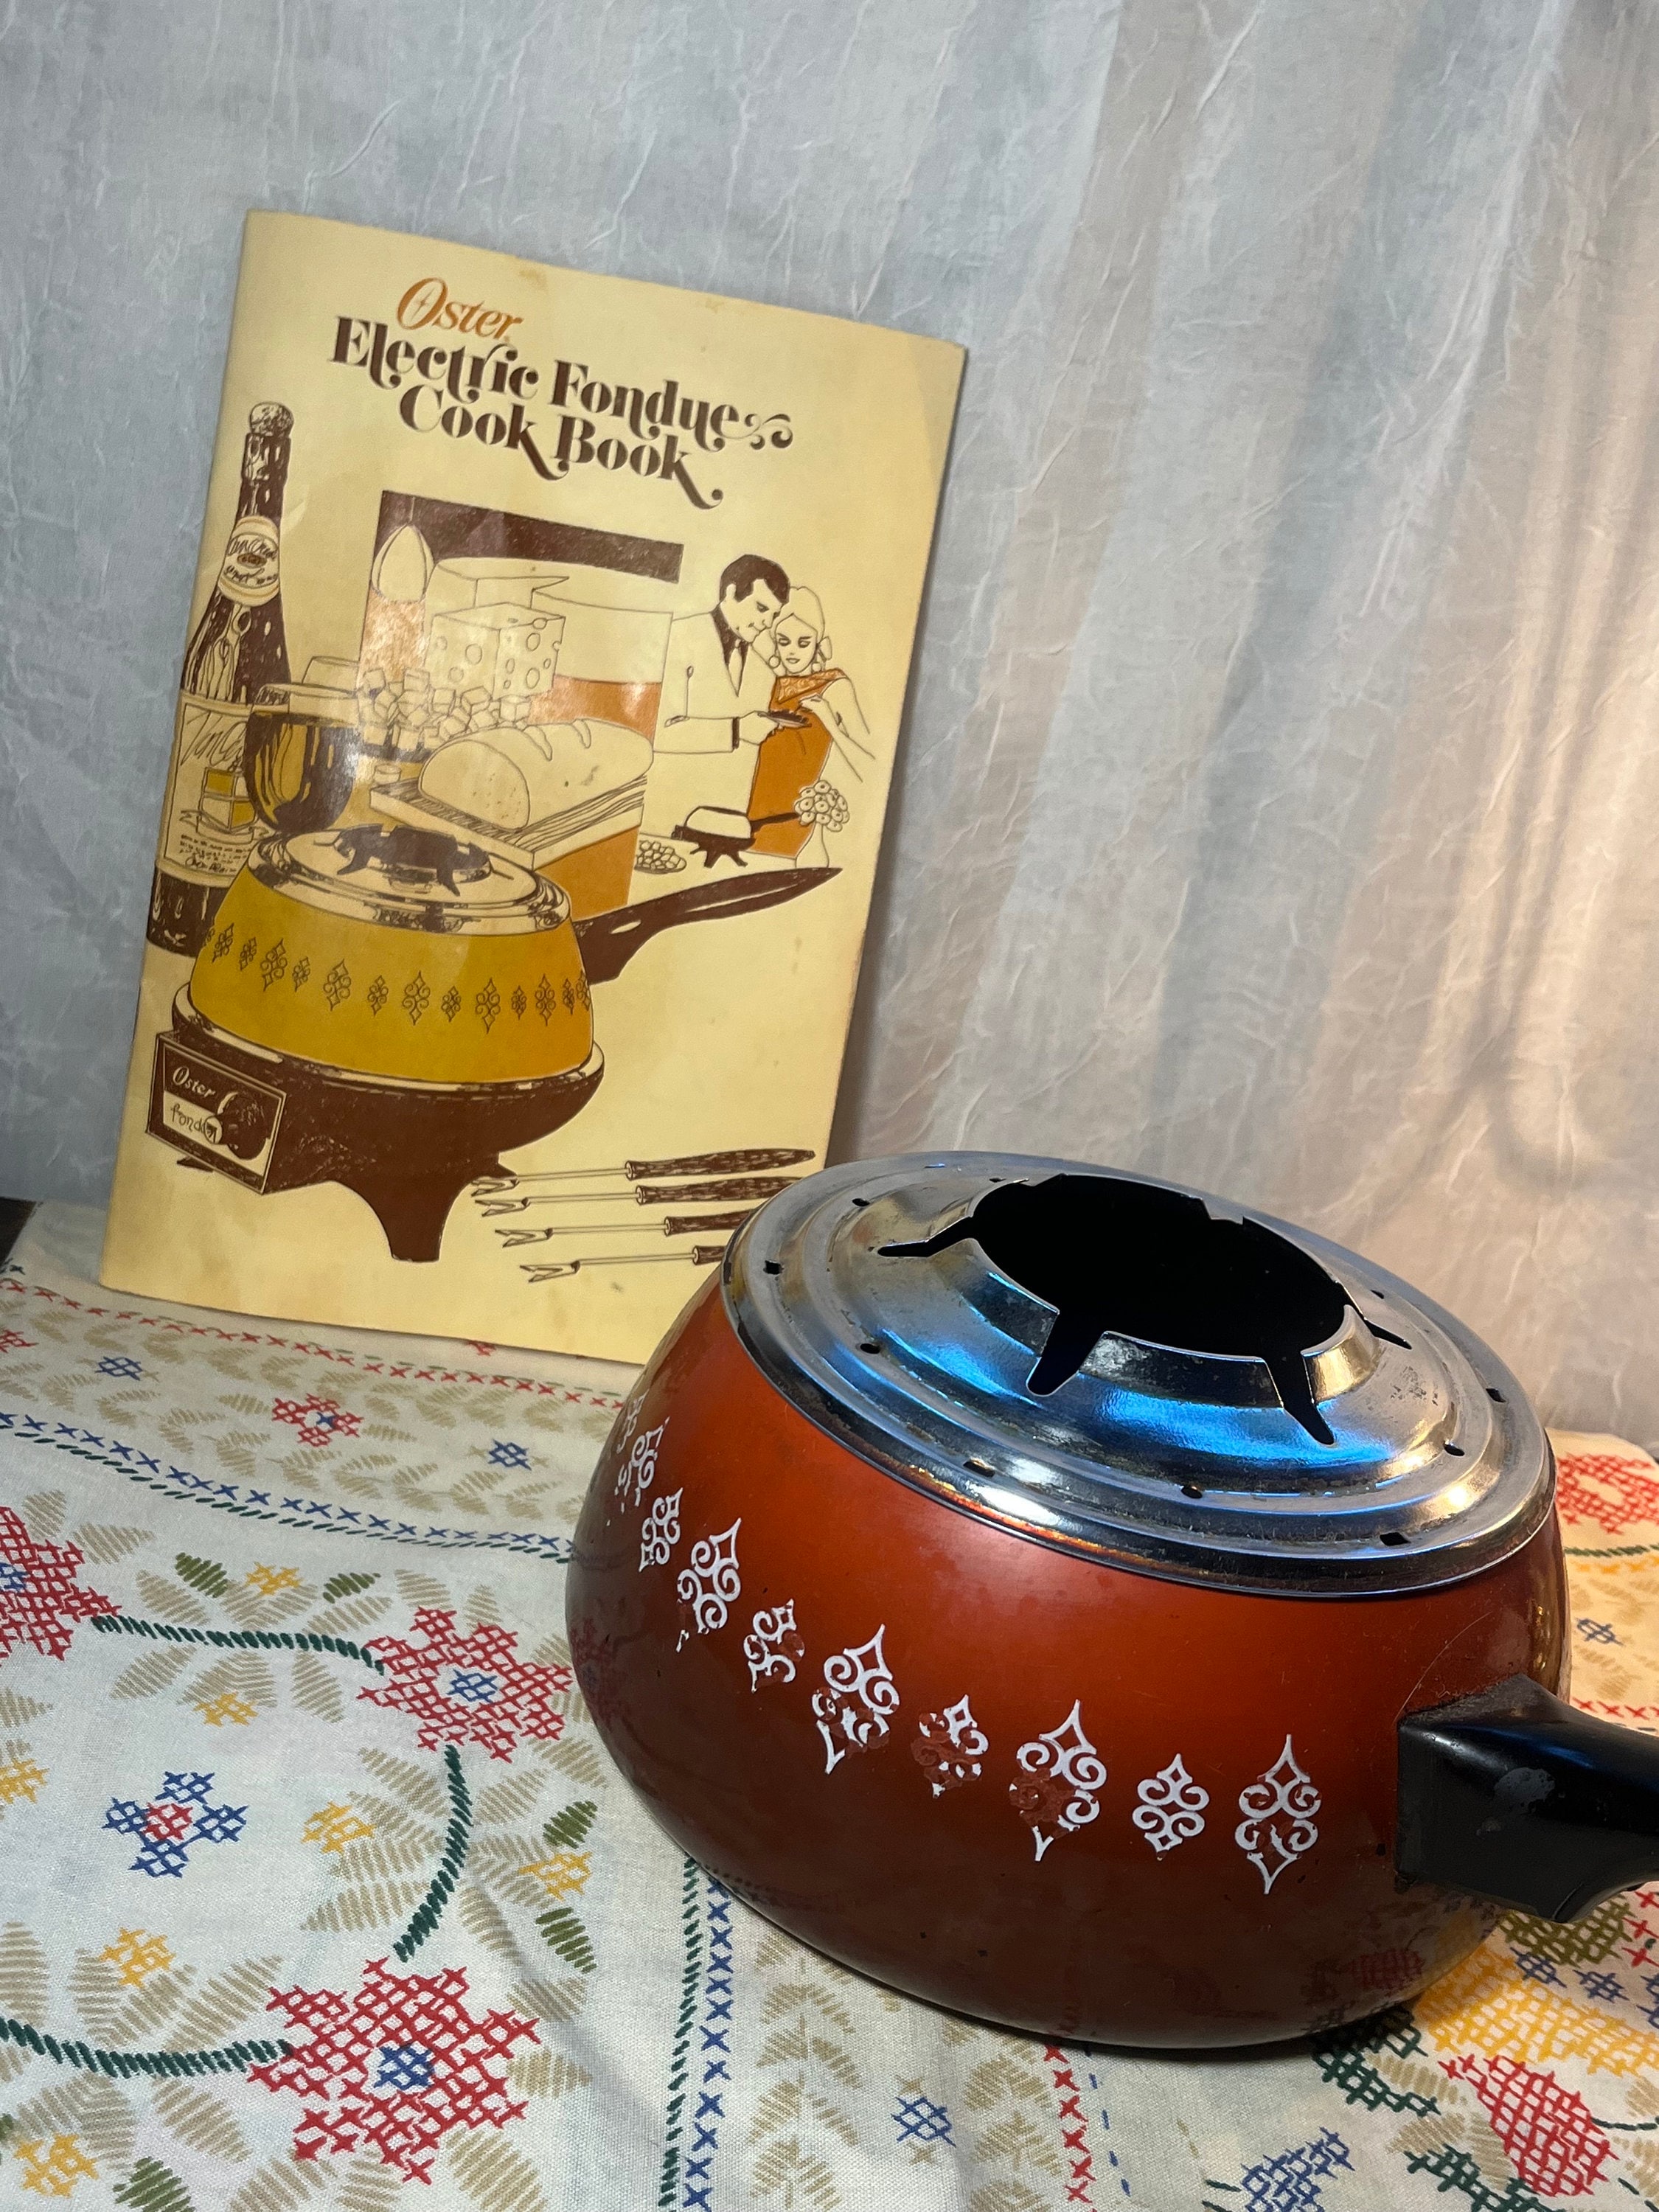 Vintage Oster Electric Fondue Set With Box and Skewers, MCM Aluminum Deep  Red Fondue Party Set With Extra Skewers and Original Box, 681-47 